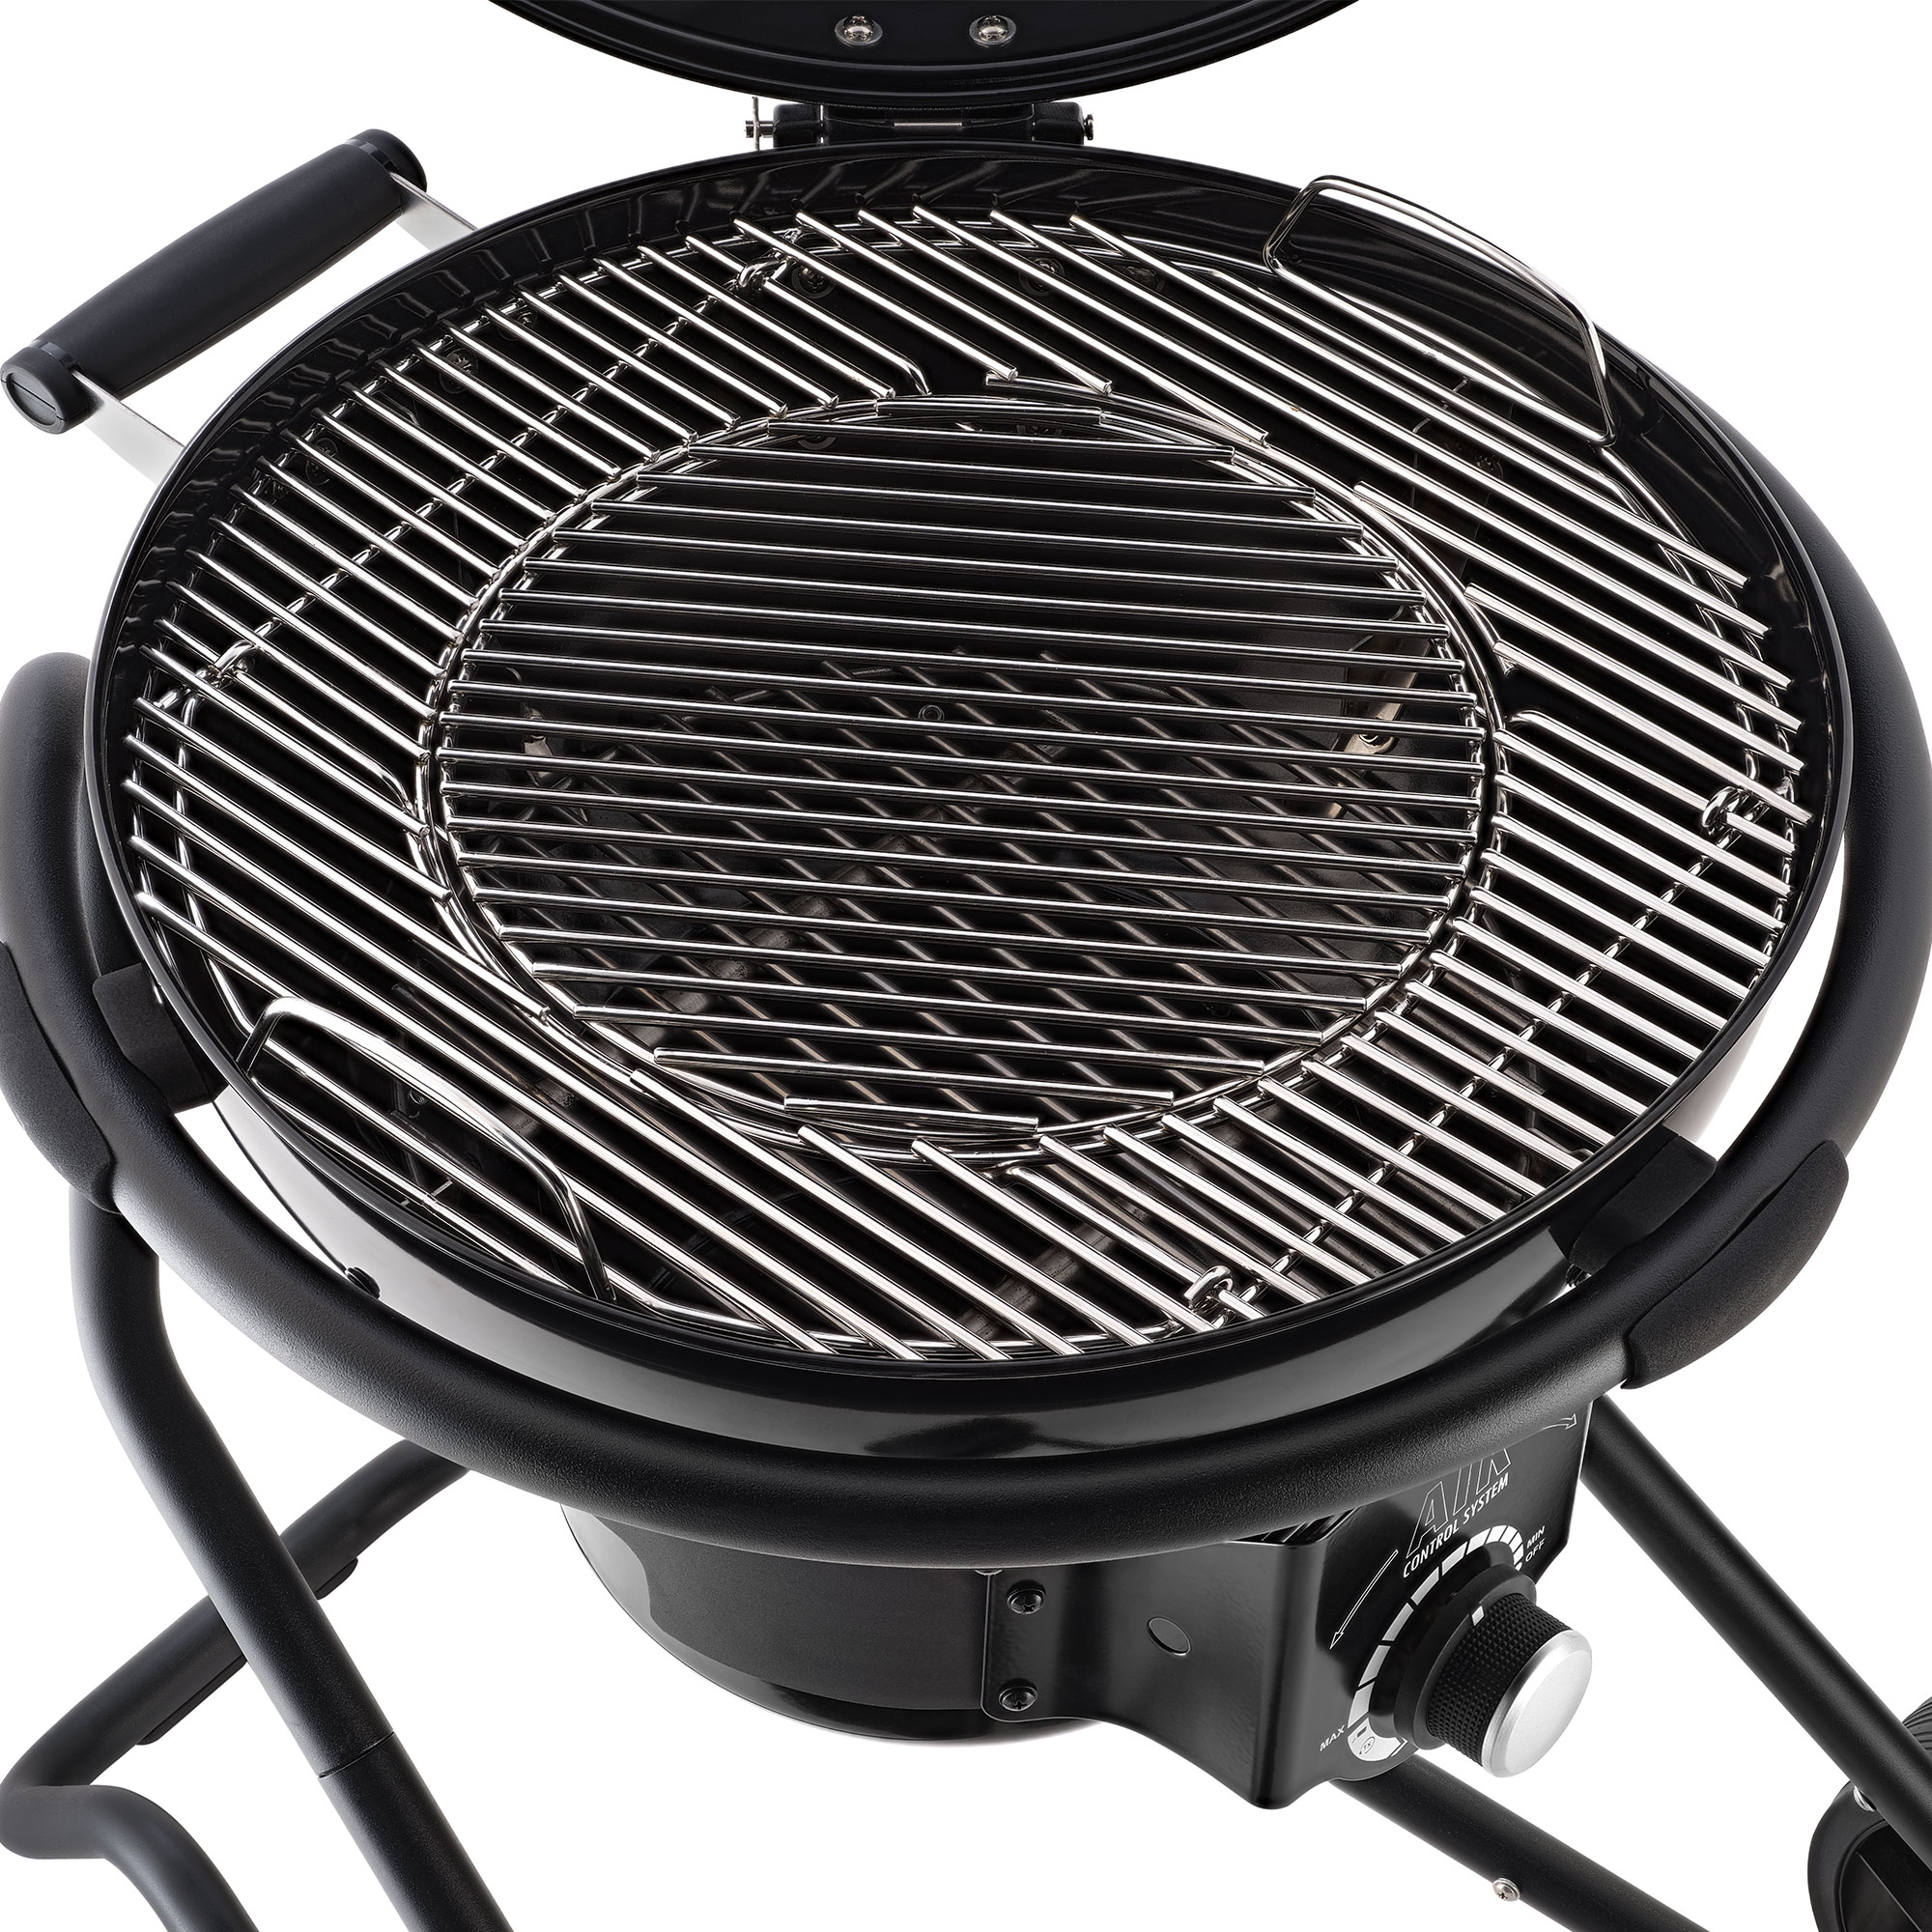 Charcoal kettle grill No.1 F50 AIR PRO VARIO+